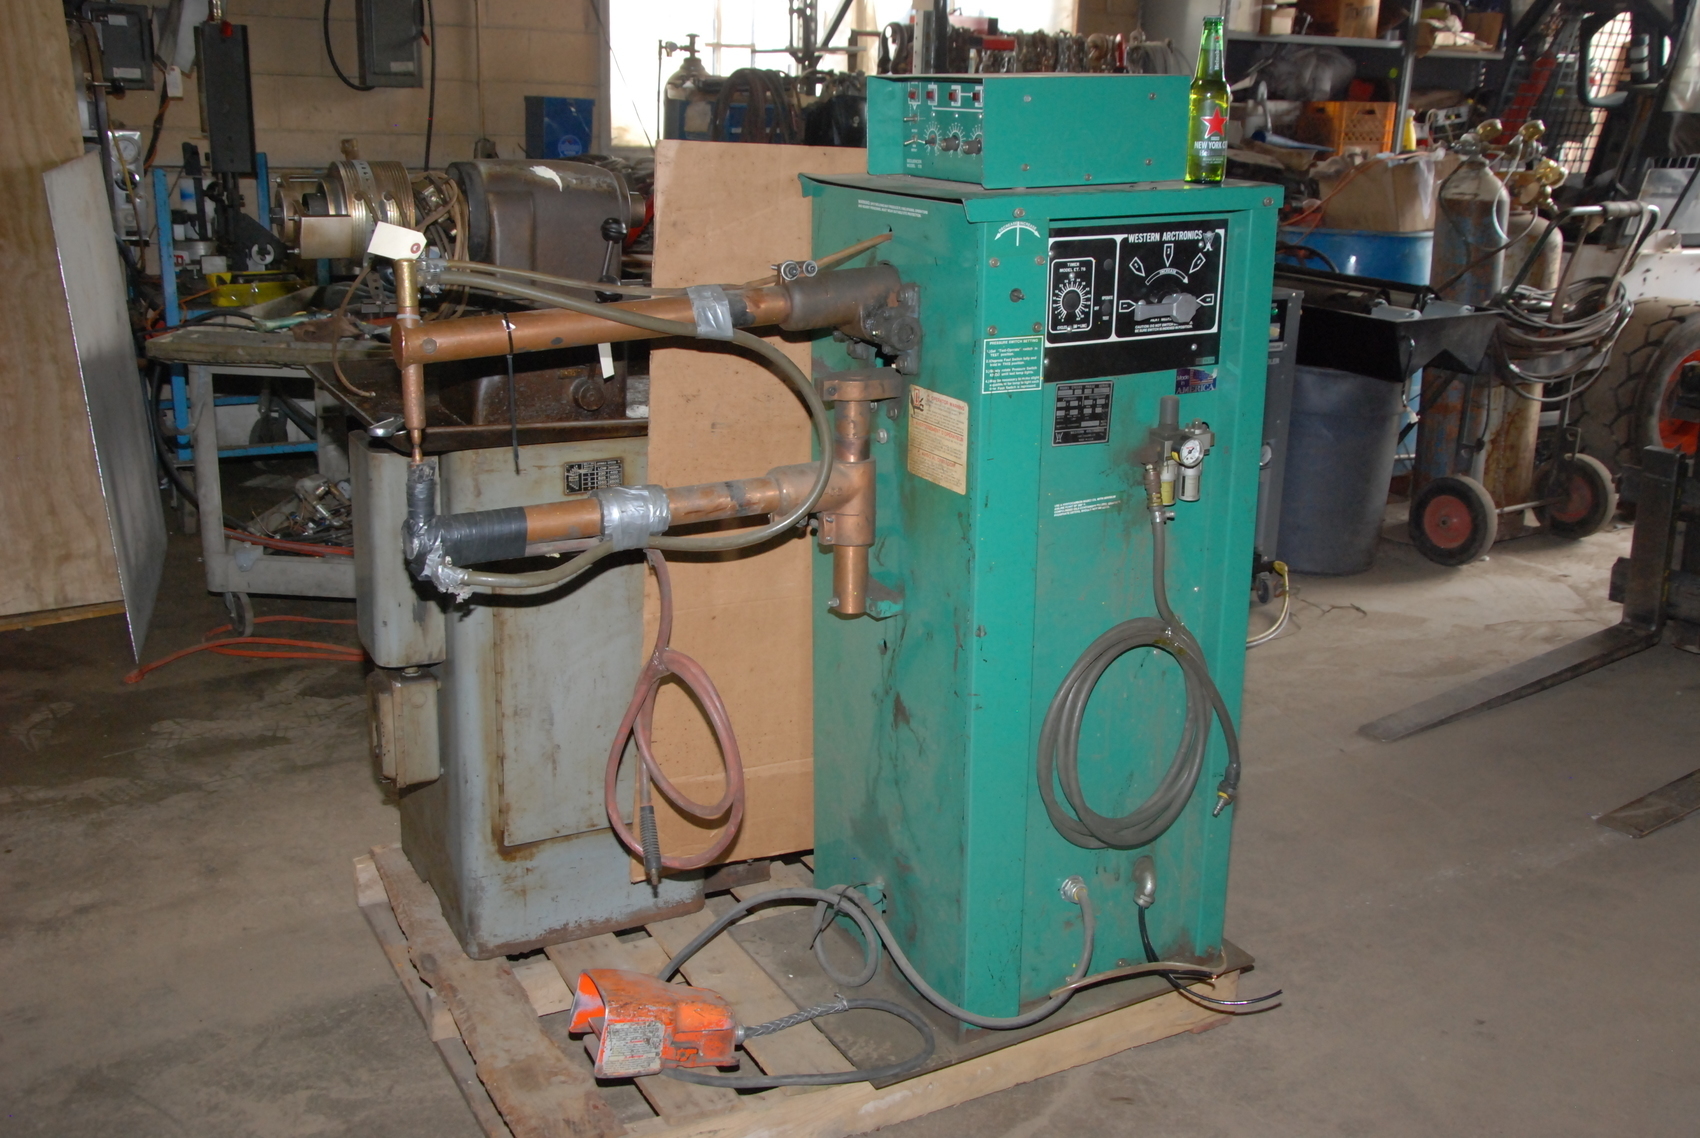 Western Arctronics 30KVA Spot Welder w/178 Sequencer and foot switch